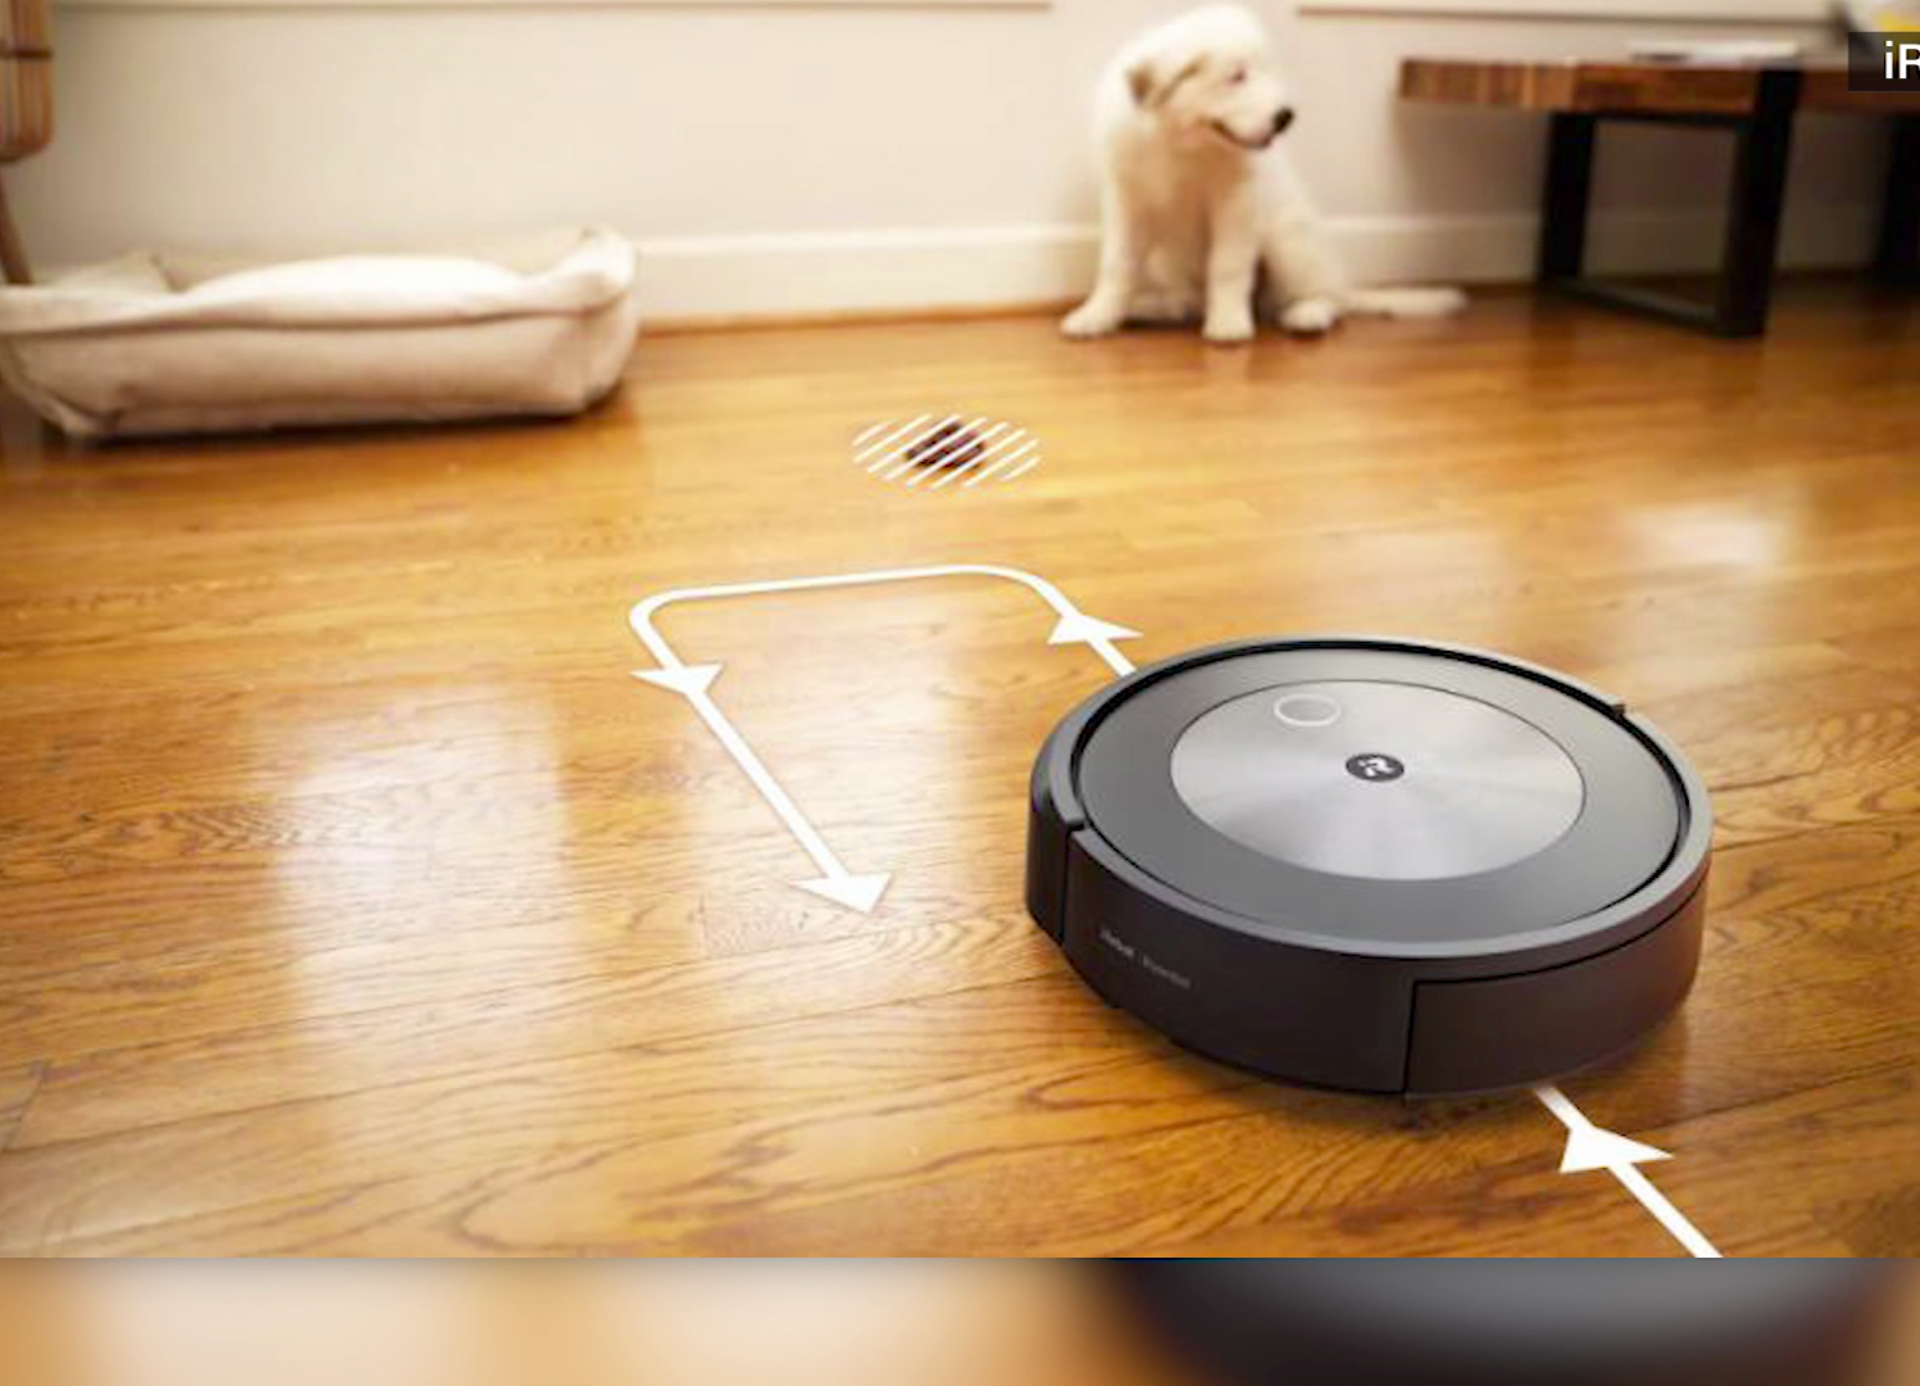 IRobot's new Roomba uses AI to avoid smearing all over your house | CNN